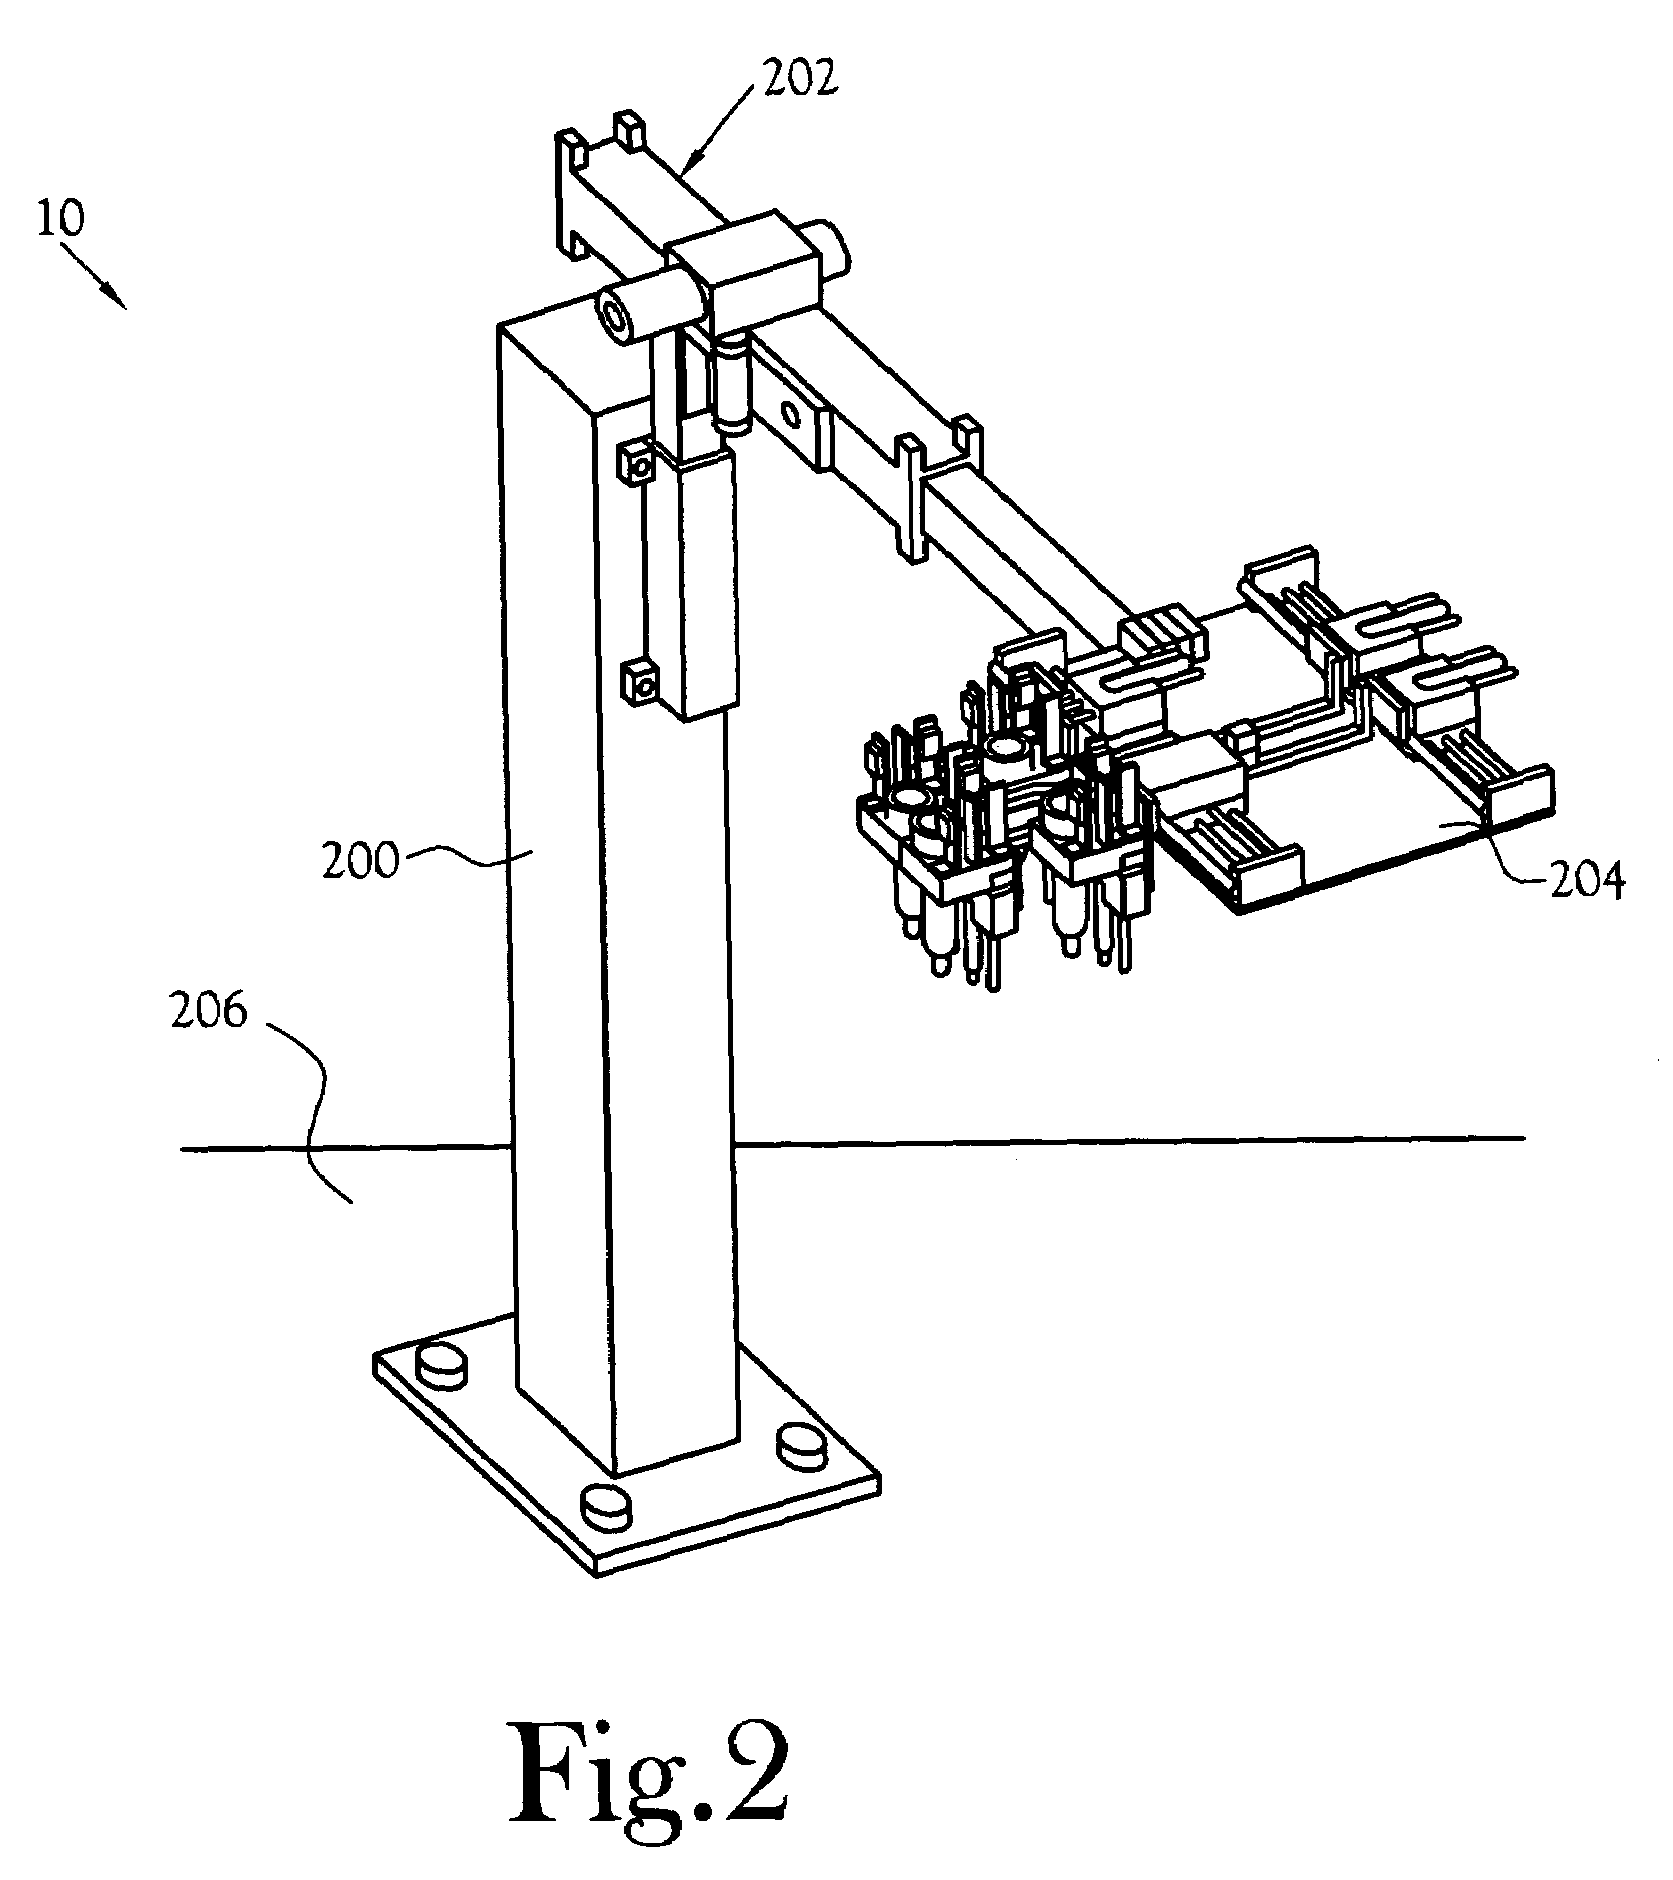 Live capture automated milking apparatus and method